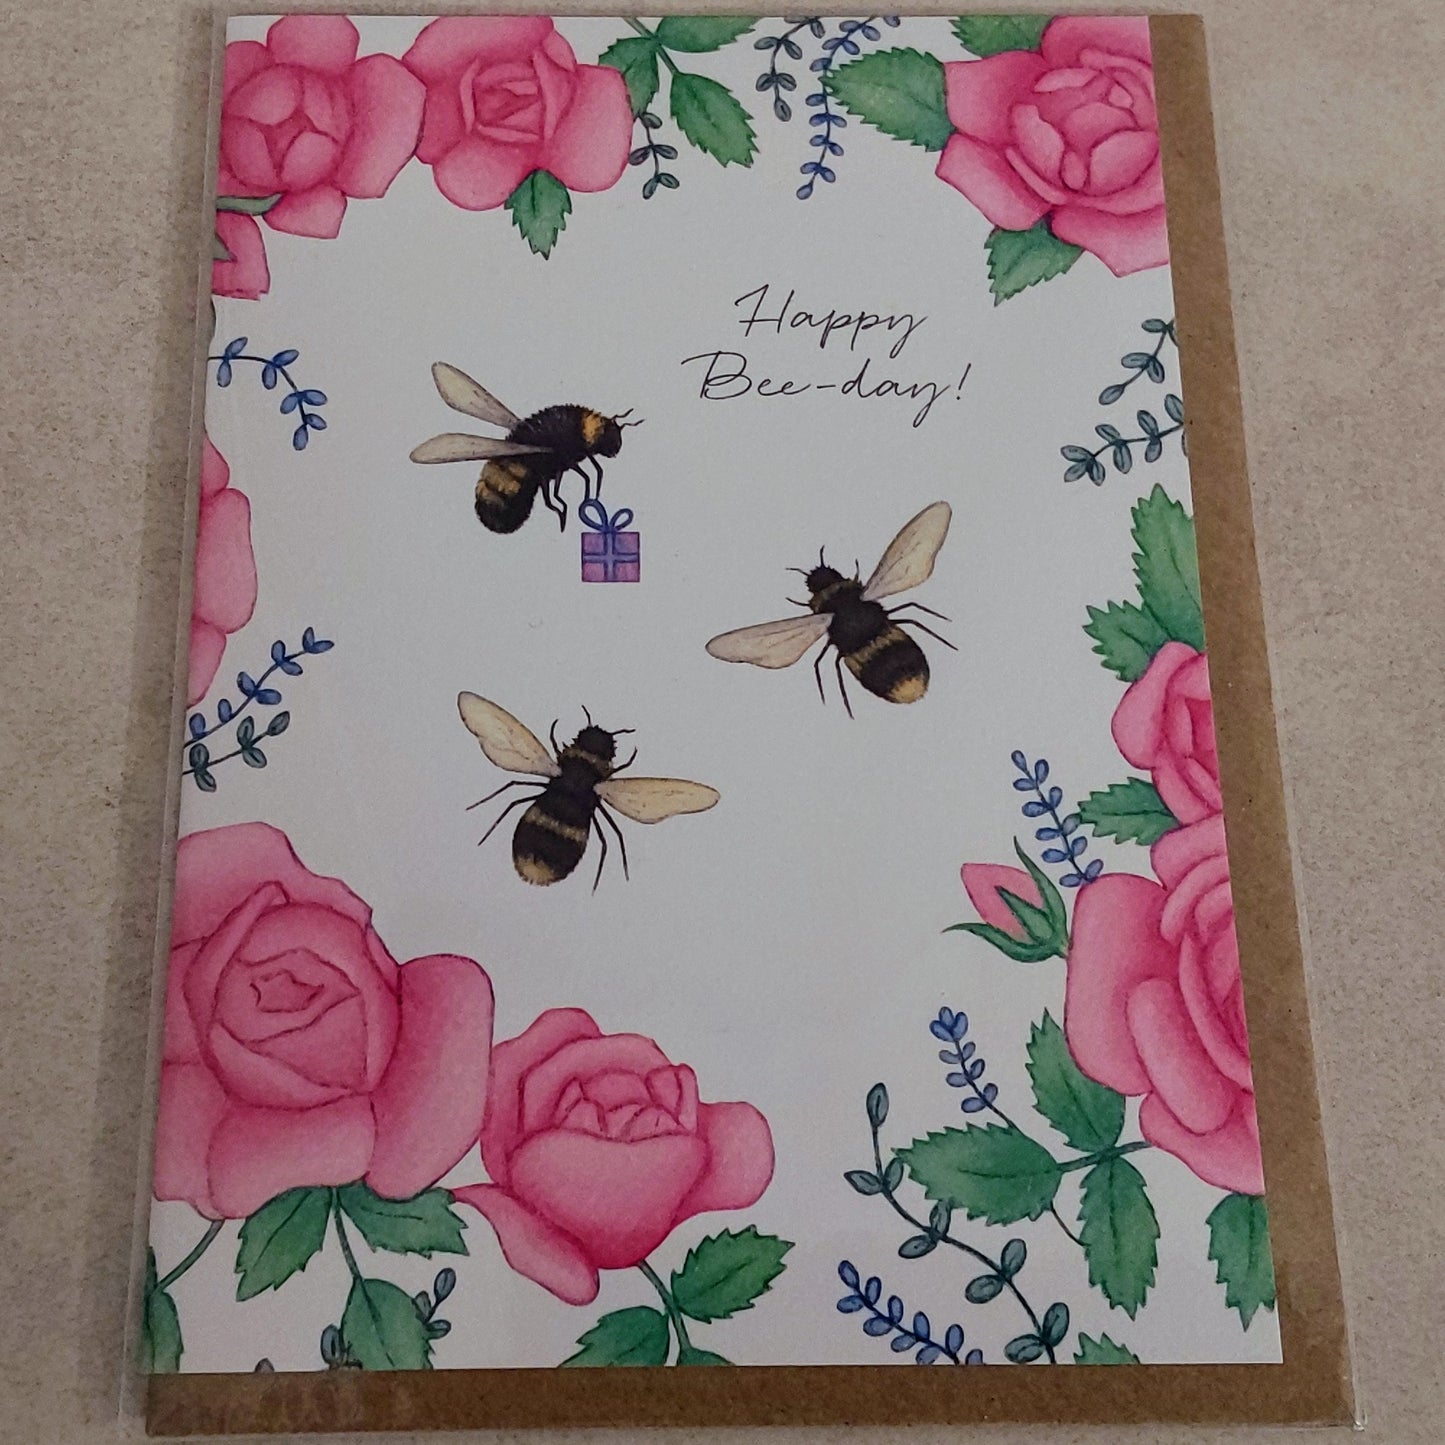 Bumble Bee Birthday Card Gift Blank Inside Honey Bees Pink Roses